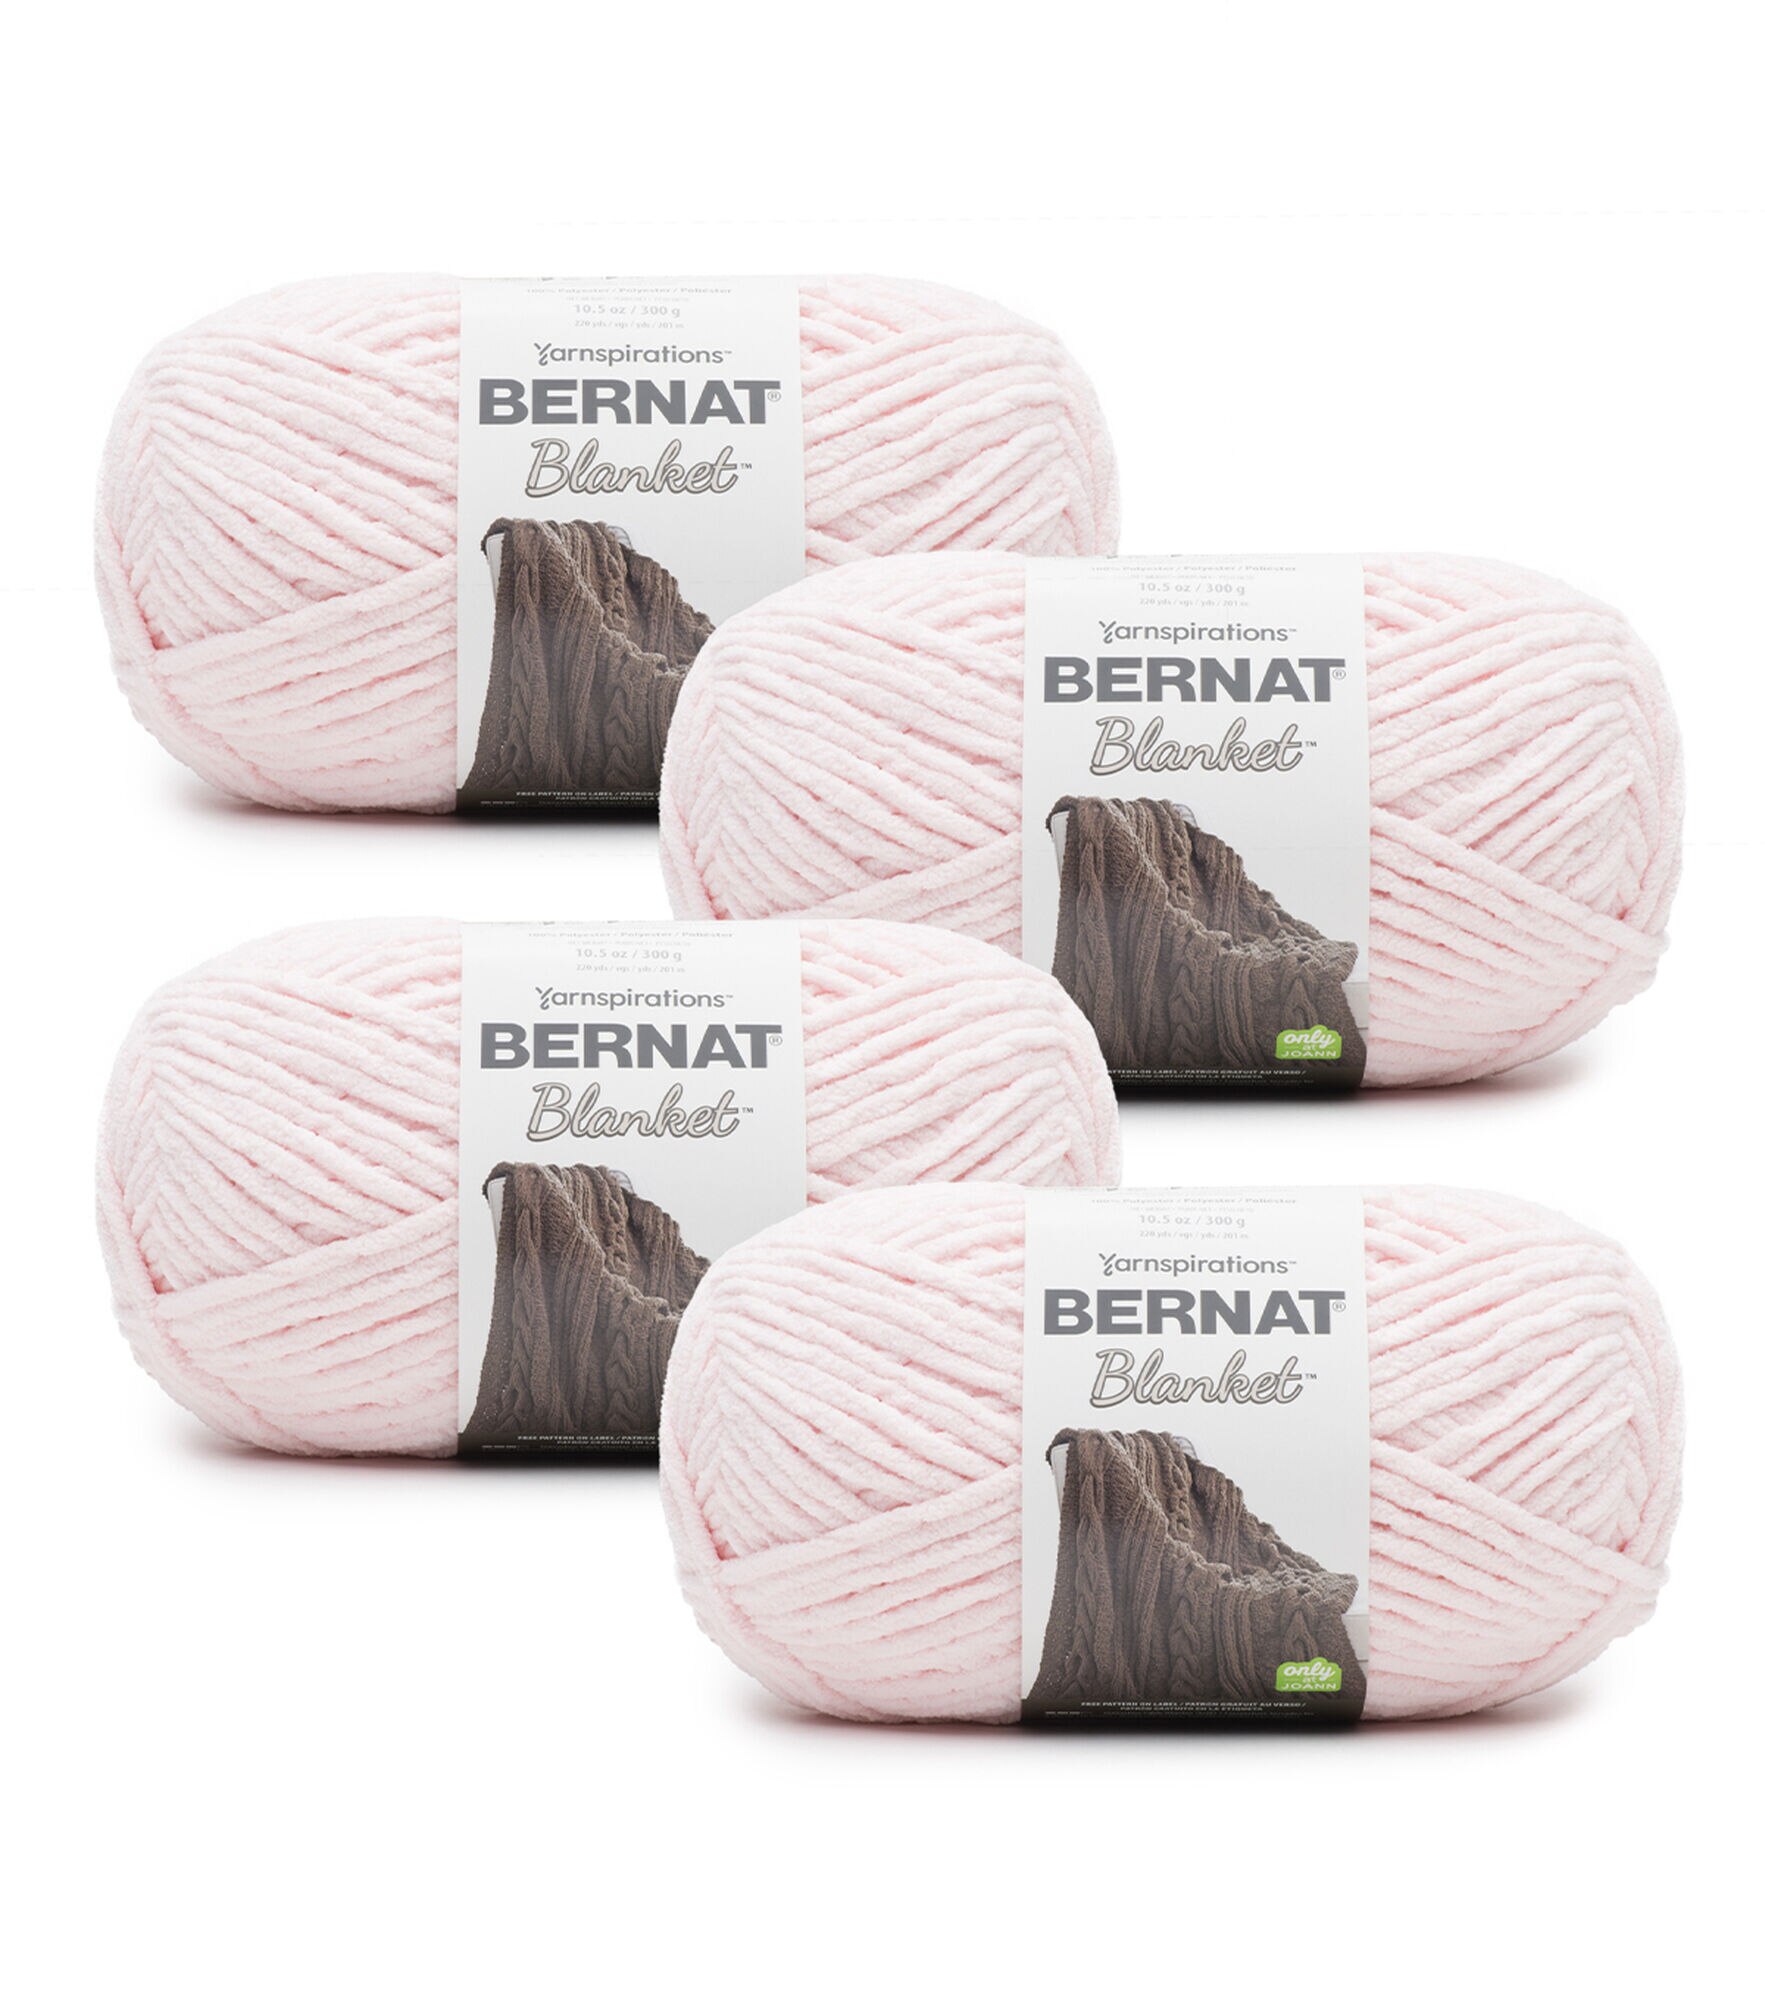 Bernat Blanket Yarn - Big Ball (10.5 oz) - 2 Pack with Pattern Cards in  Color (Tan Pink)